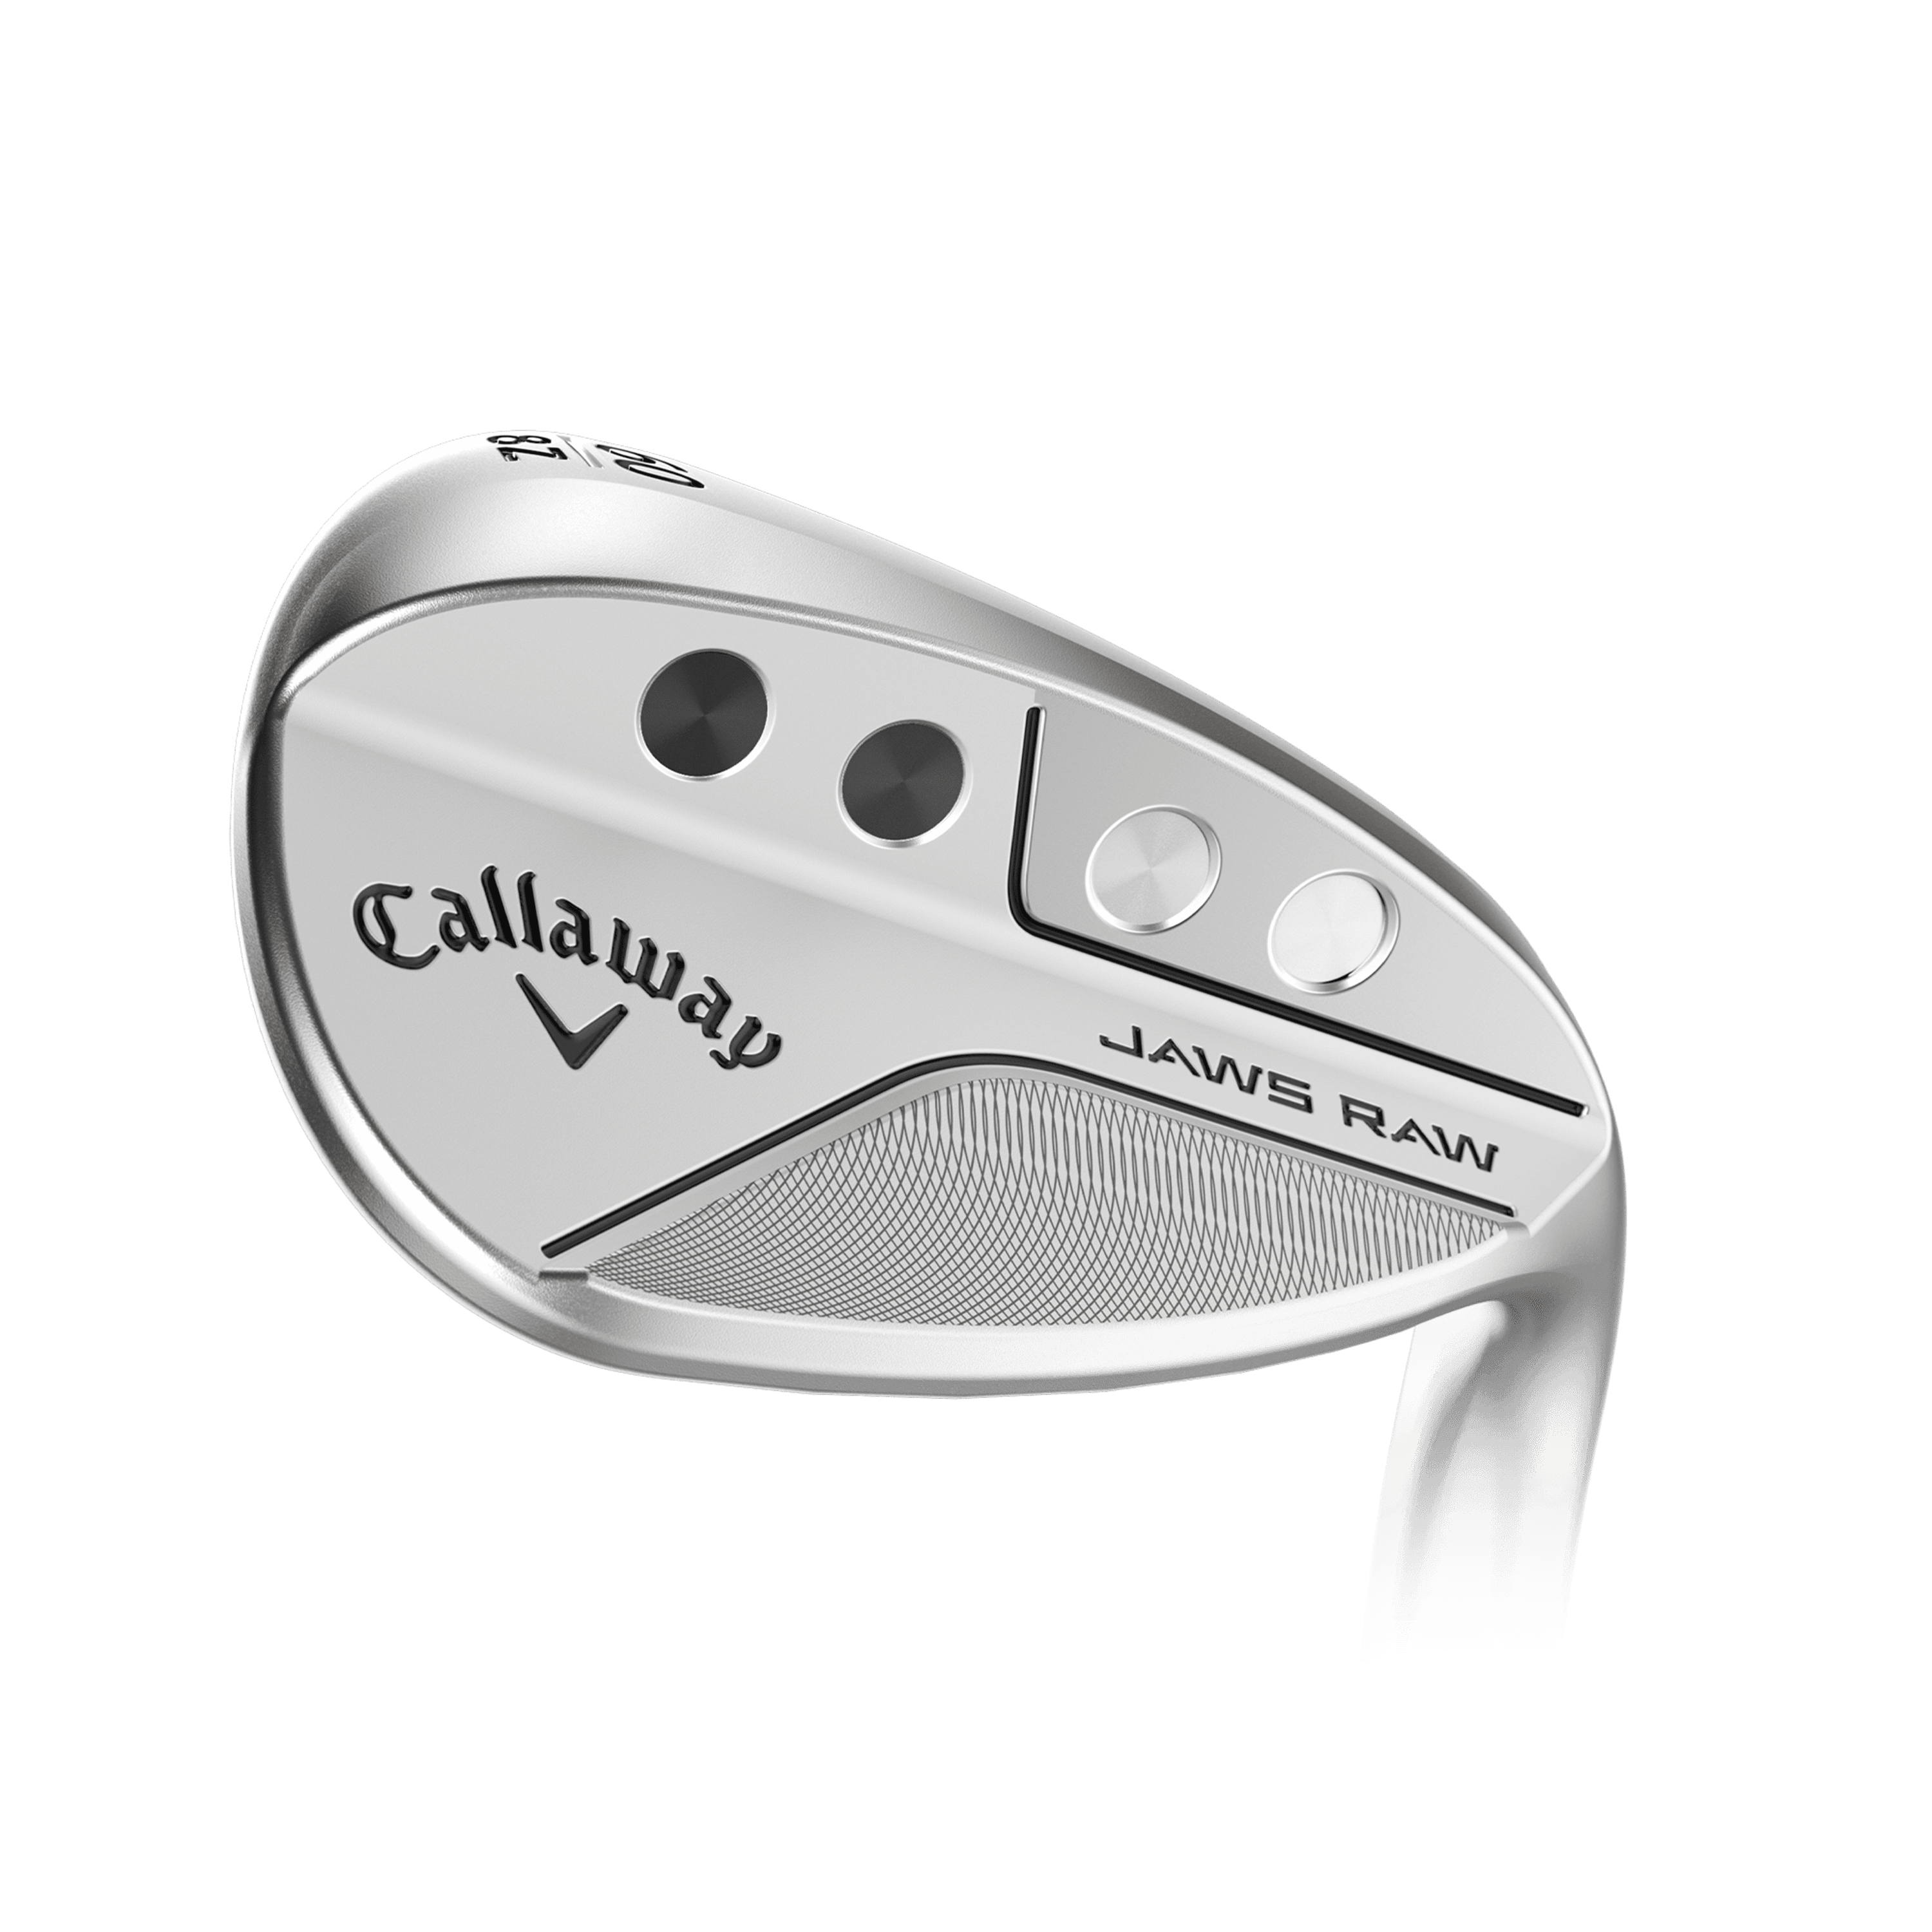 New Weight Balanced Design for Enhanced Feel and Improved Scoring Performance